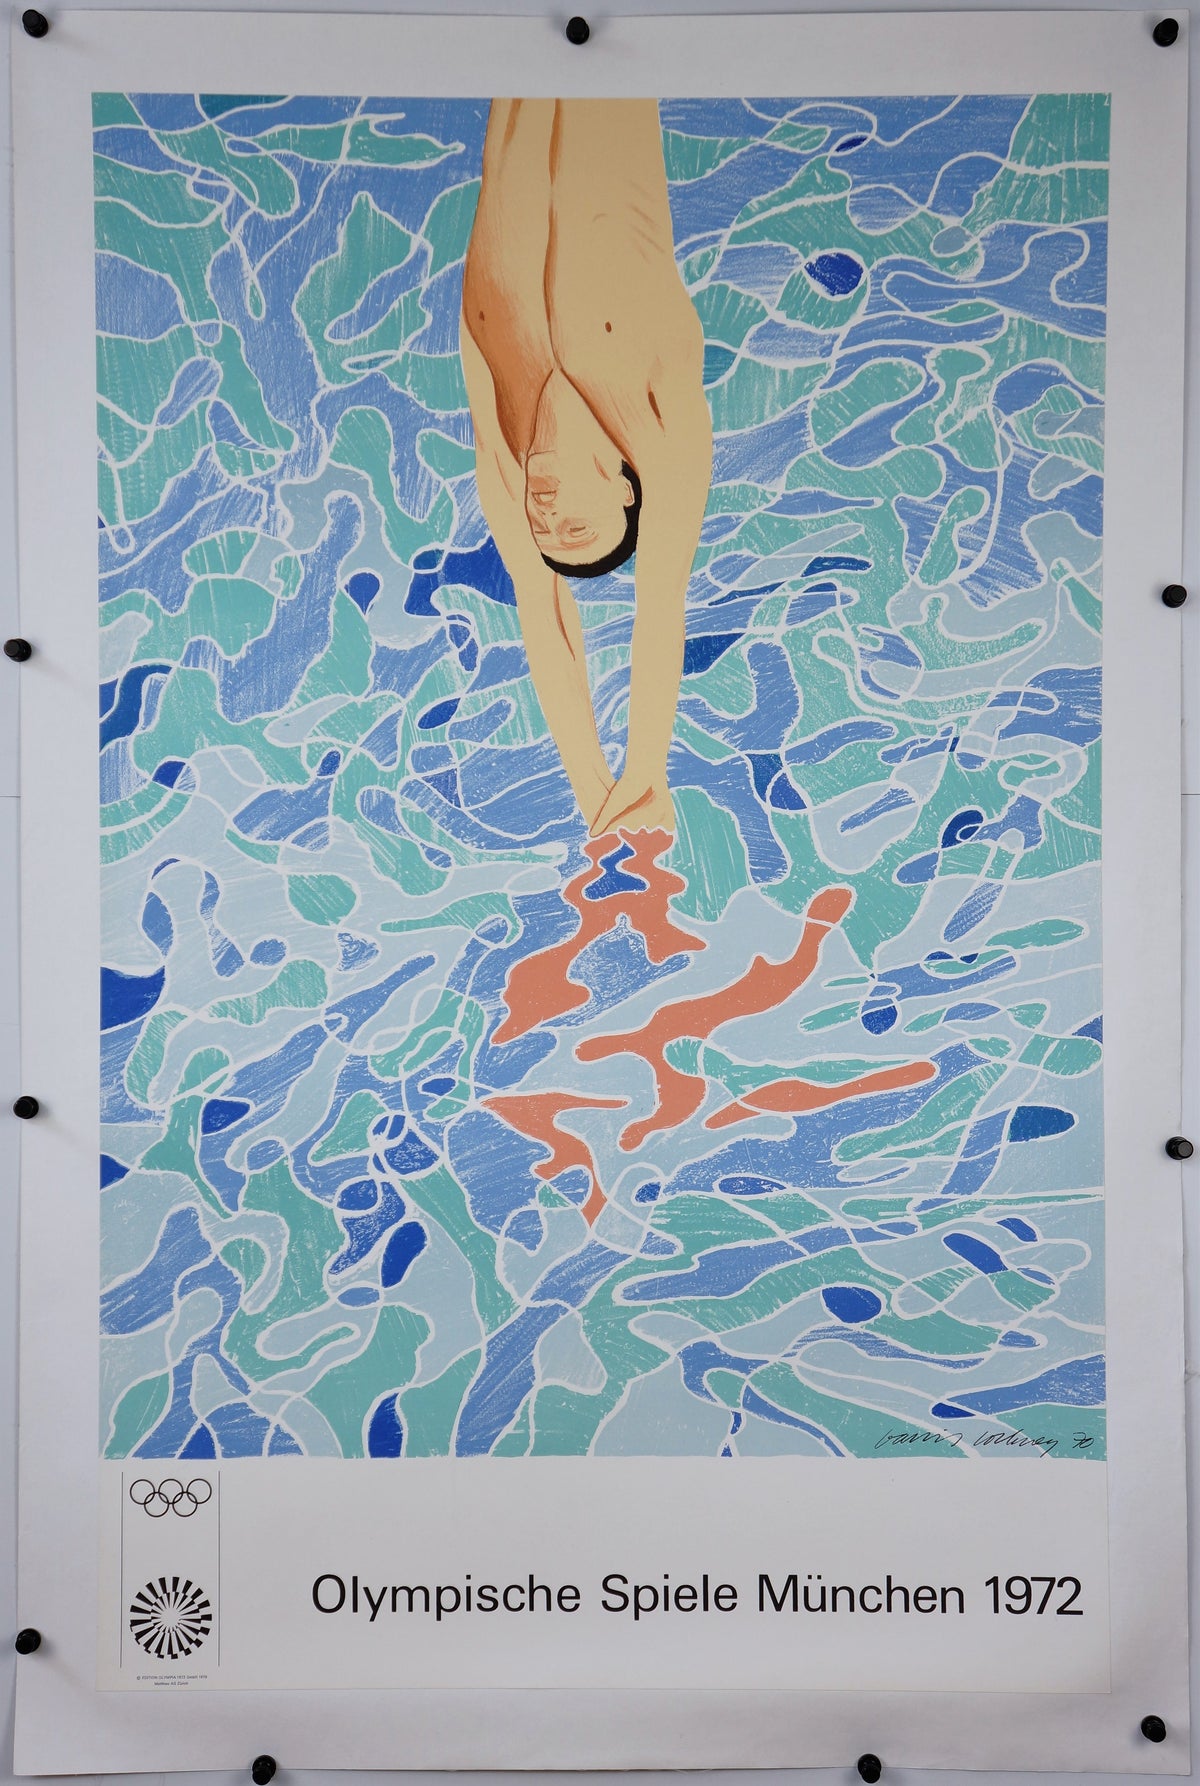 Munich Olympics by David Hockney - Authentic Vintage Poster